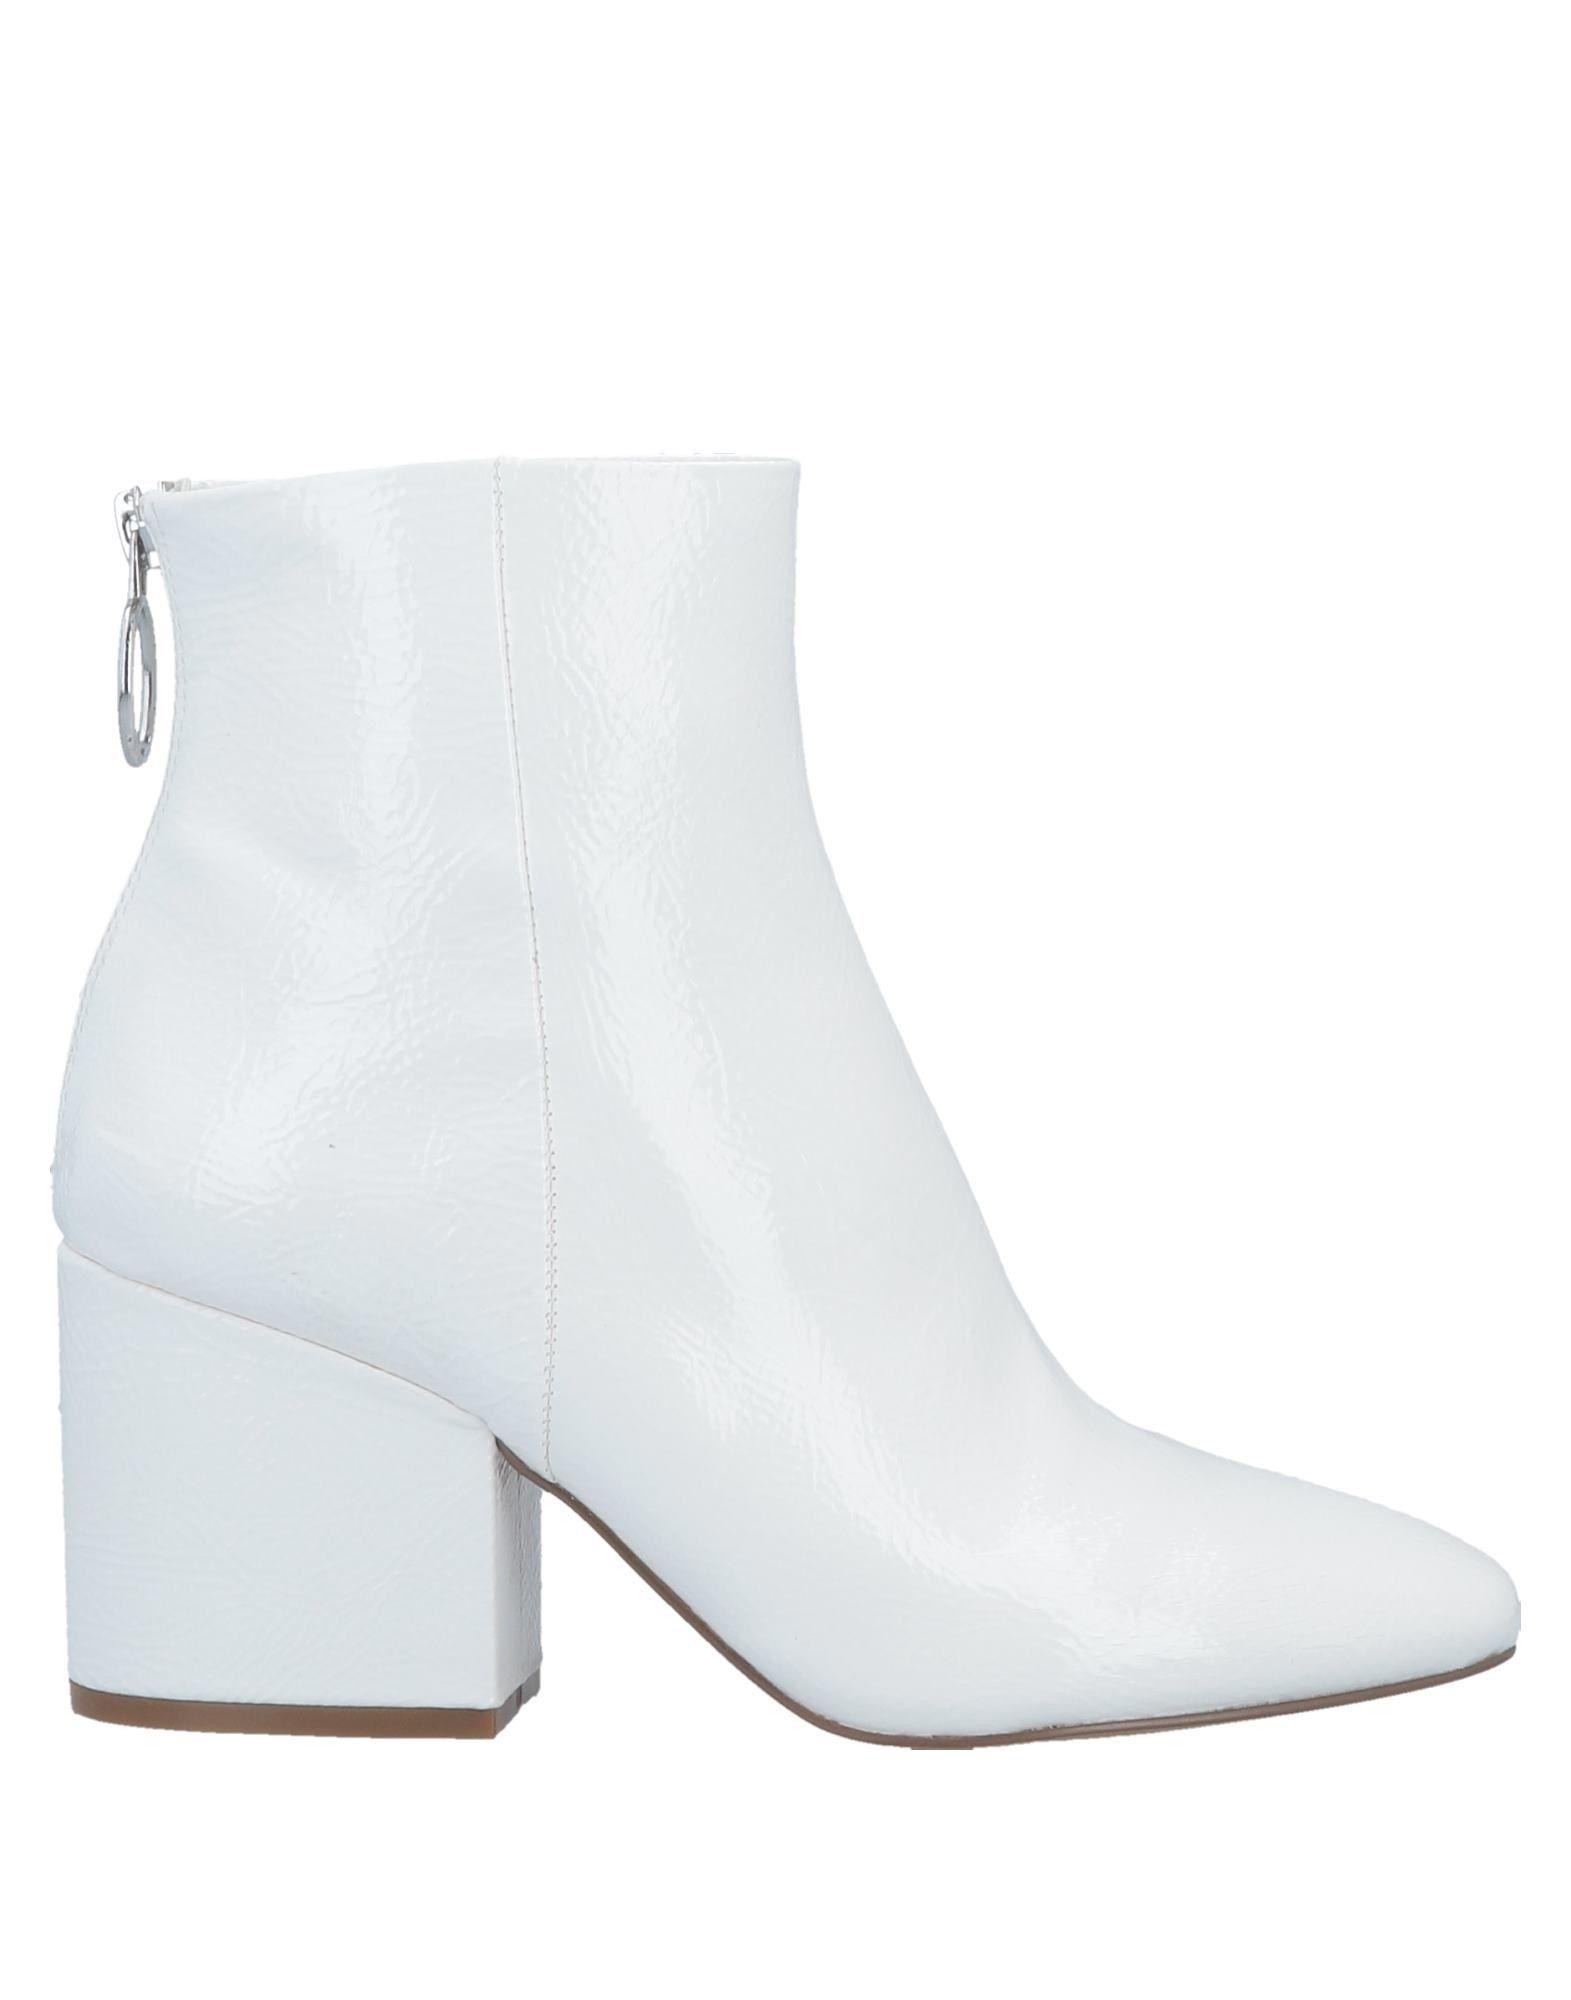 Steve Madden Ankle Boots in White - Lyst